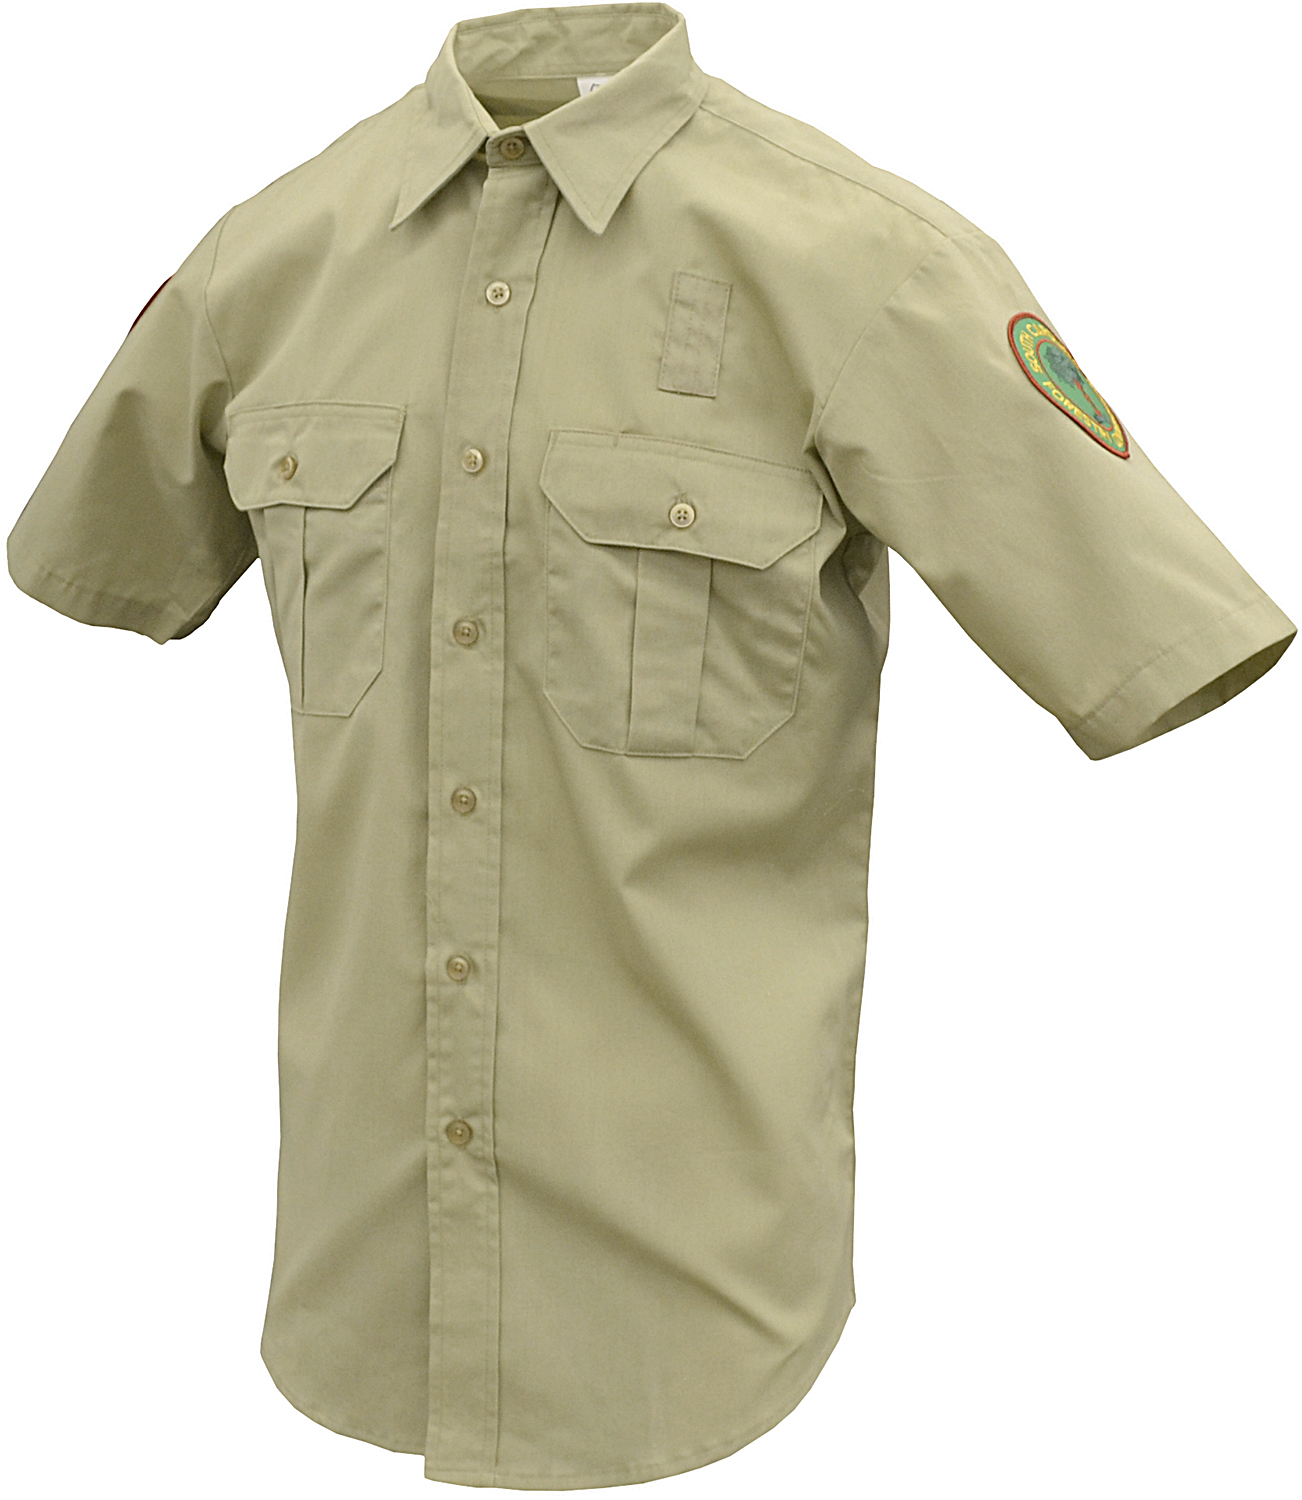 Men's Short Sleeve Work Shirt for LE with Badge Tab